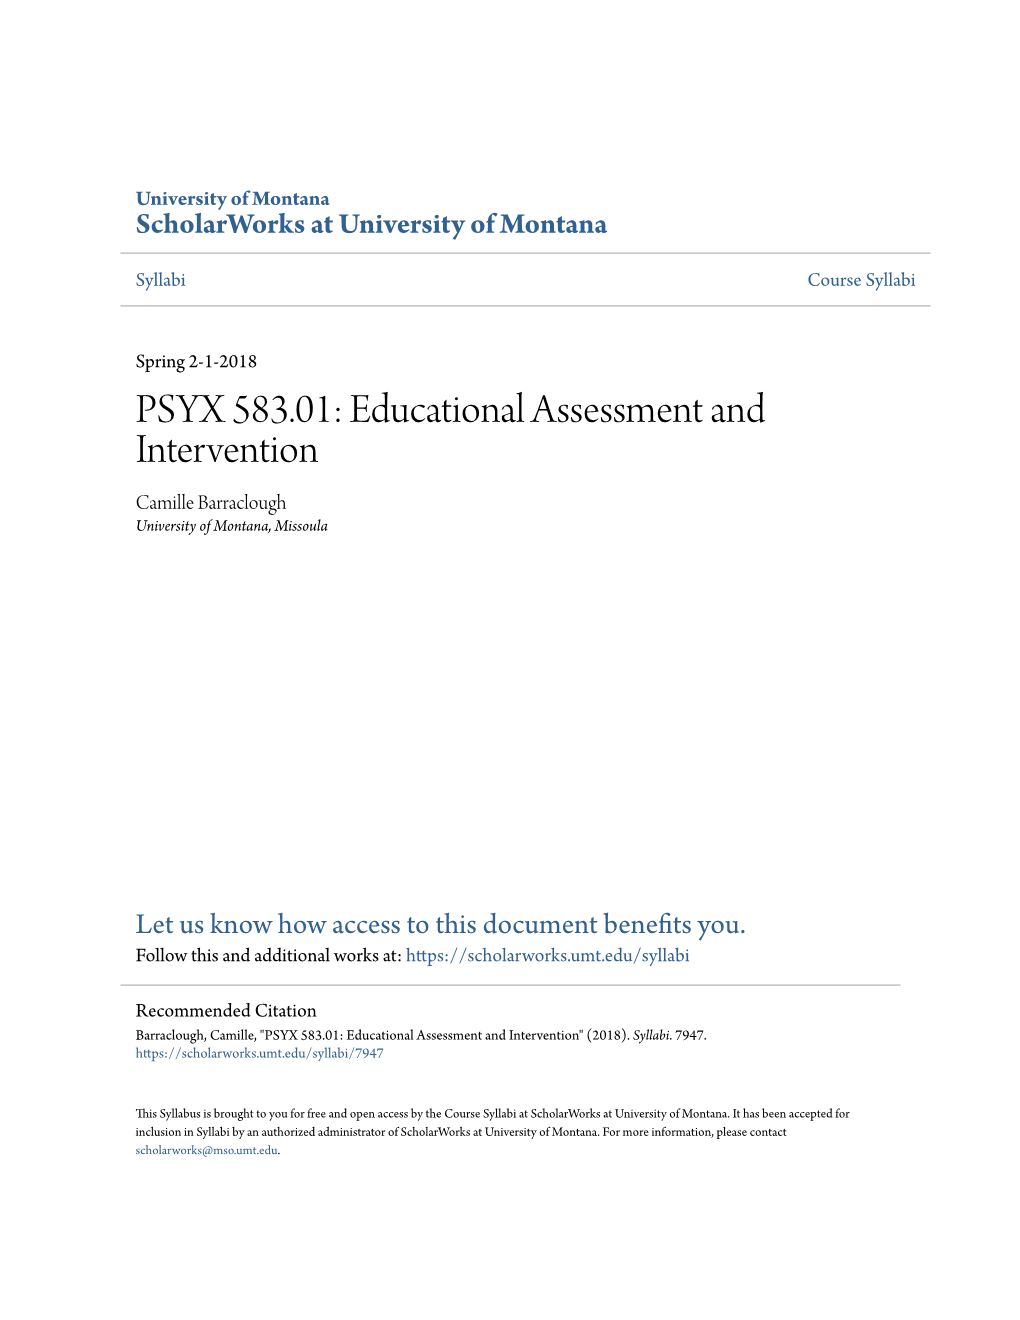 PSYX 583.01: Educational Assessment and Intervention Camille Barraclough University of Montana, Missoula